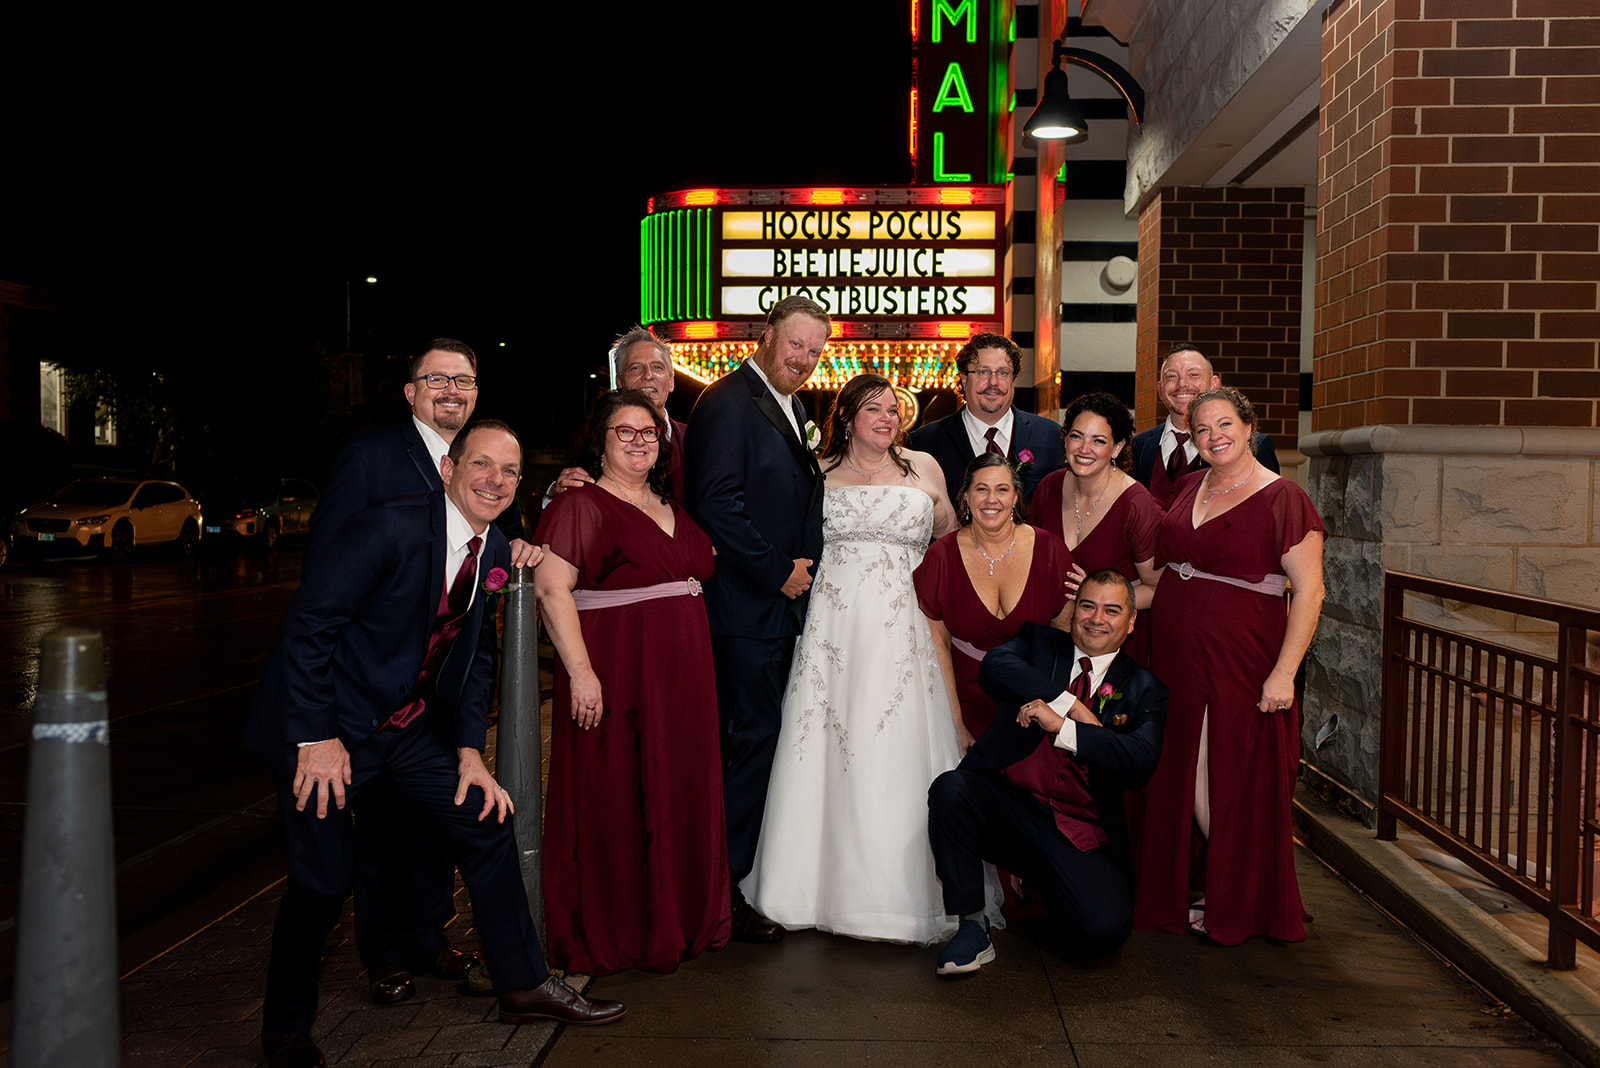 theater marquee in background of bridal party photo